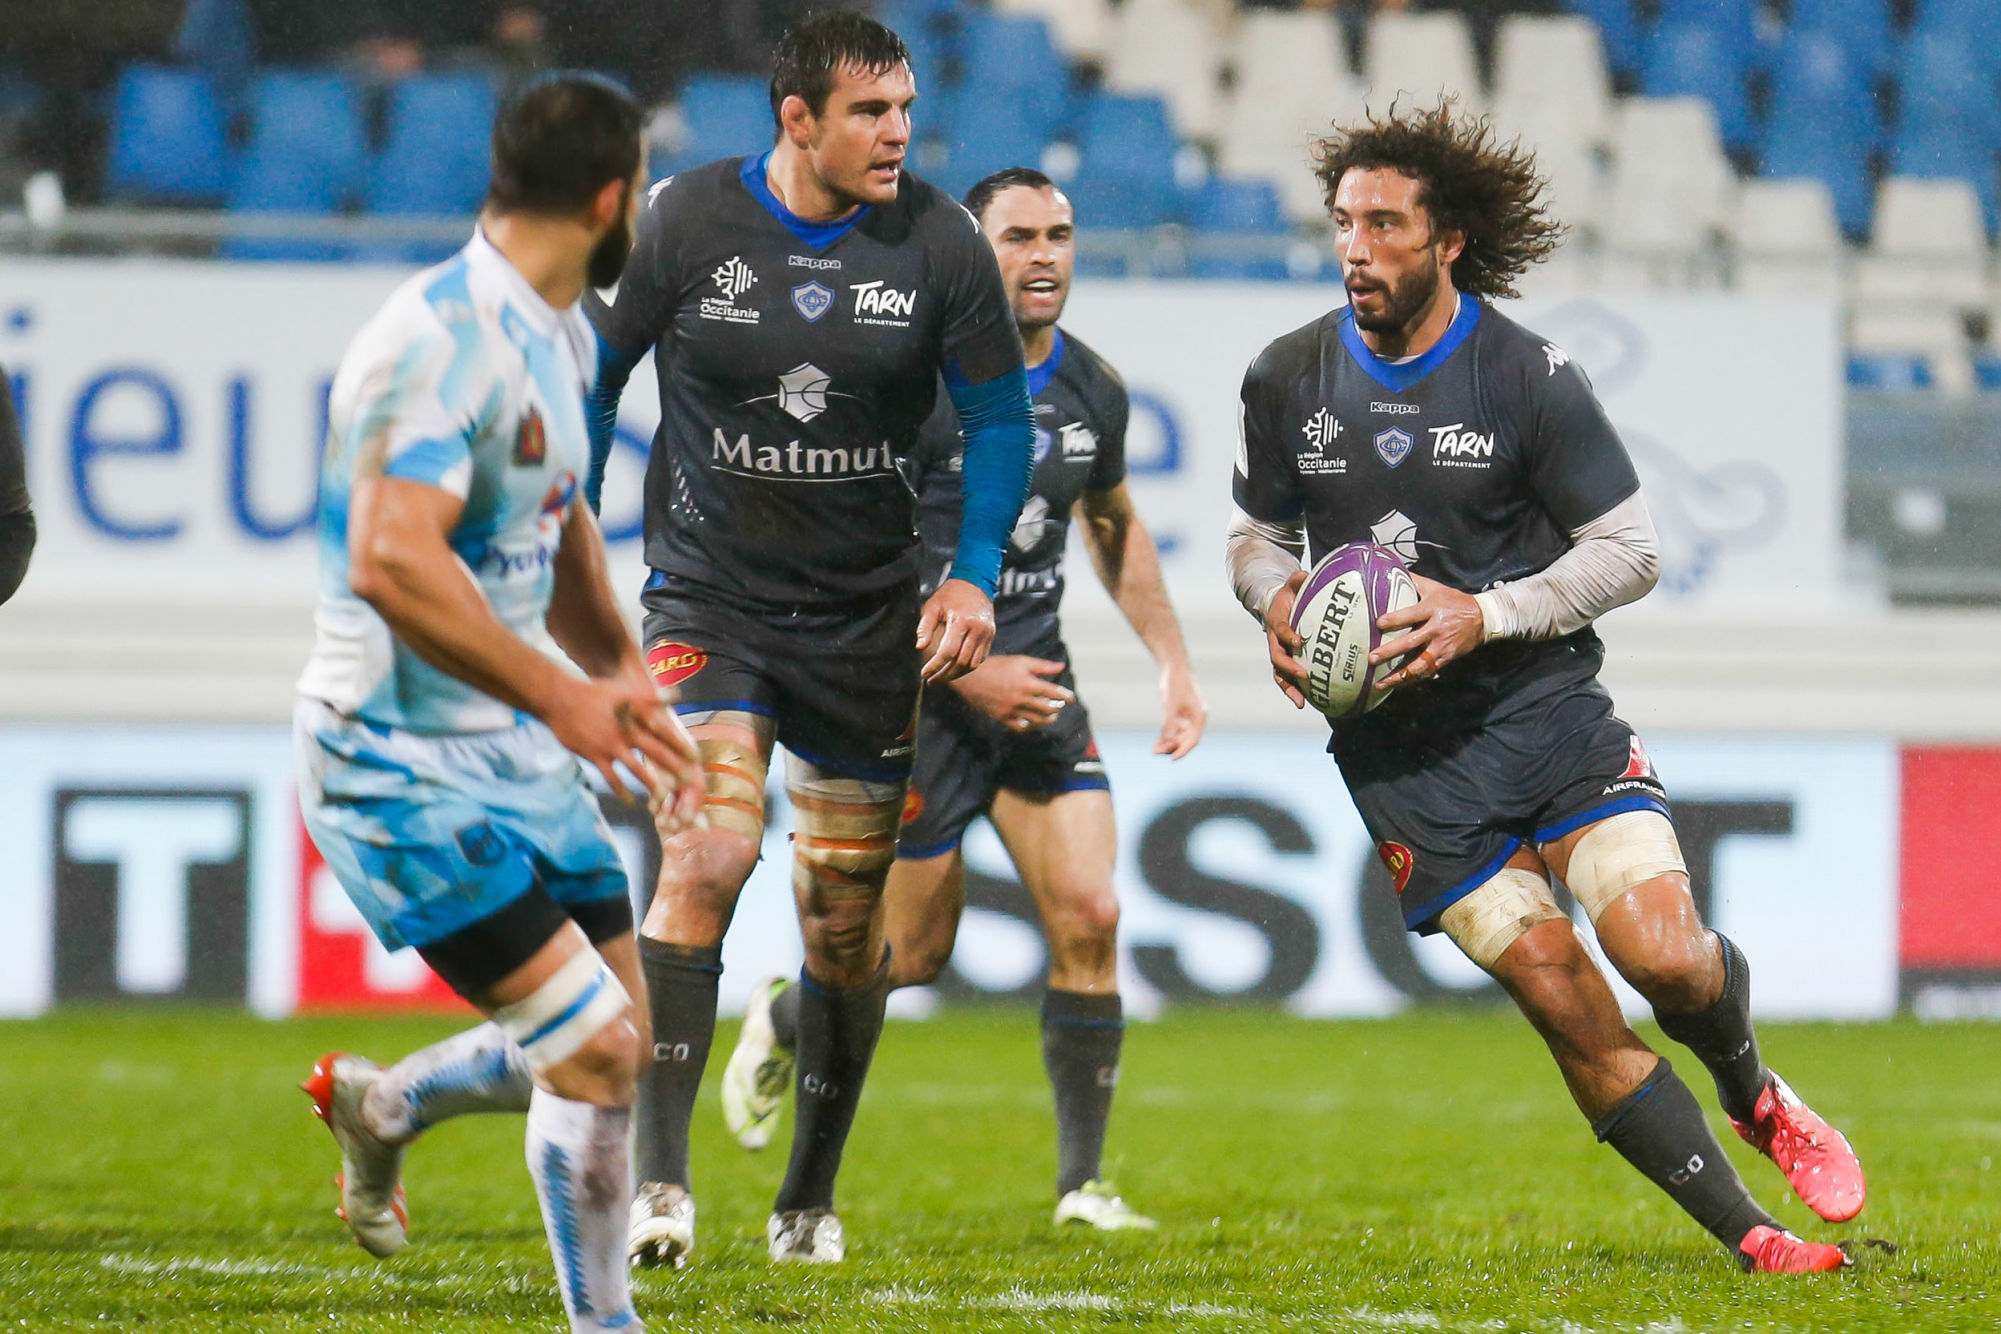 Camille Gerondeau during the European Rugby Challenge Cup, Pool 1 match between Castres and Enisei STM on December 13, 2019 in Castres, France. (Photo by Laurent Frezouls/Icon Sport) - Stade Pierre Fabre - Castres (France)